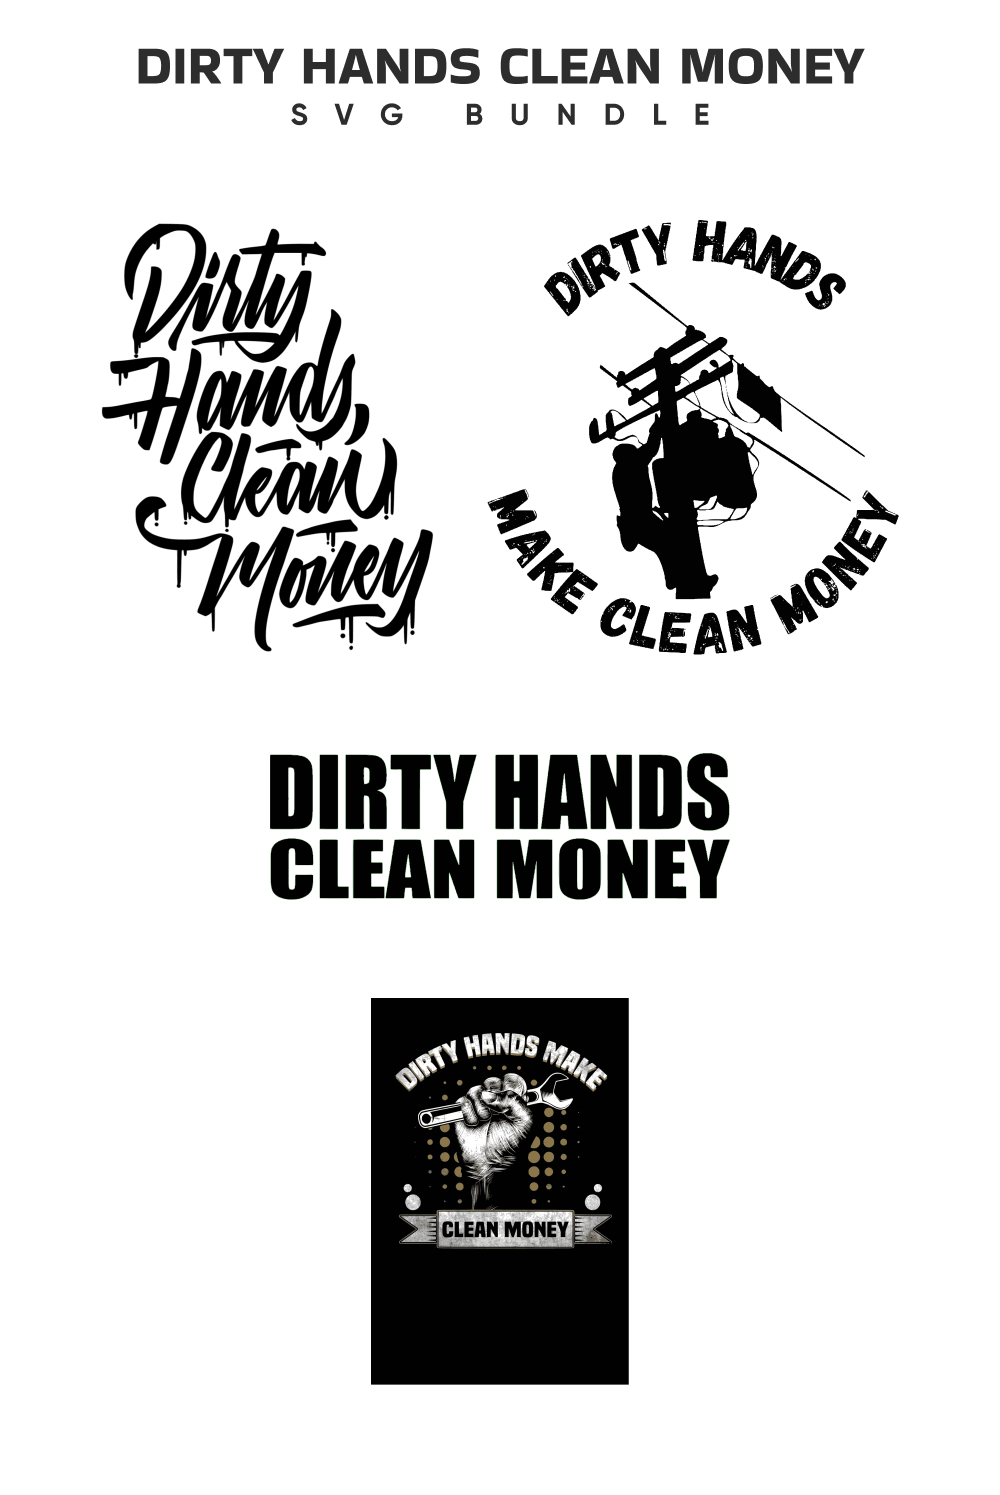 Dirty hands clean money collection.